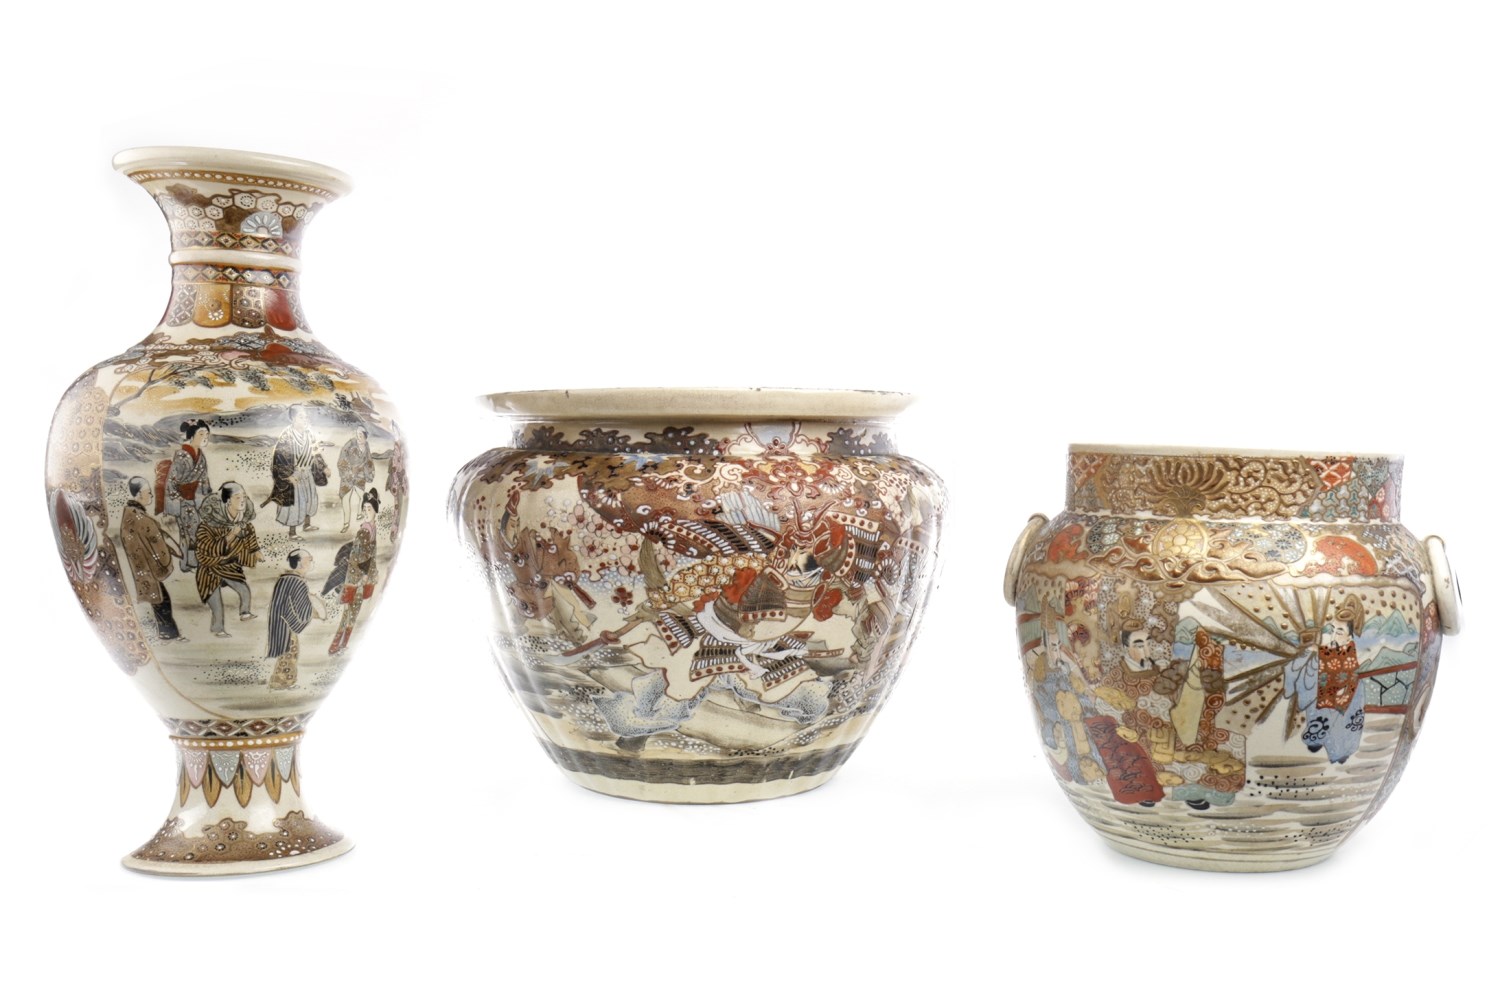 AN EARLY 20TH CENTURY JAPANESE VASE AND TWO JARDINIERES